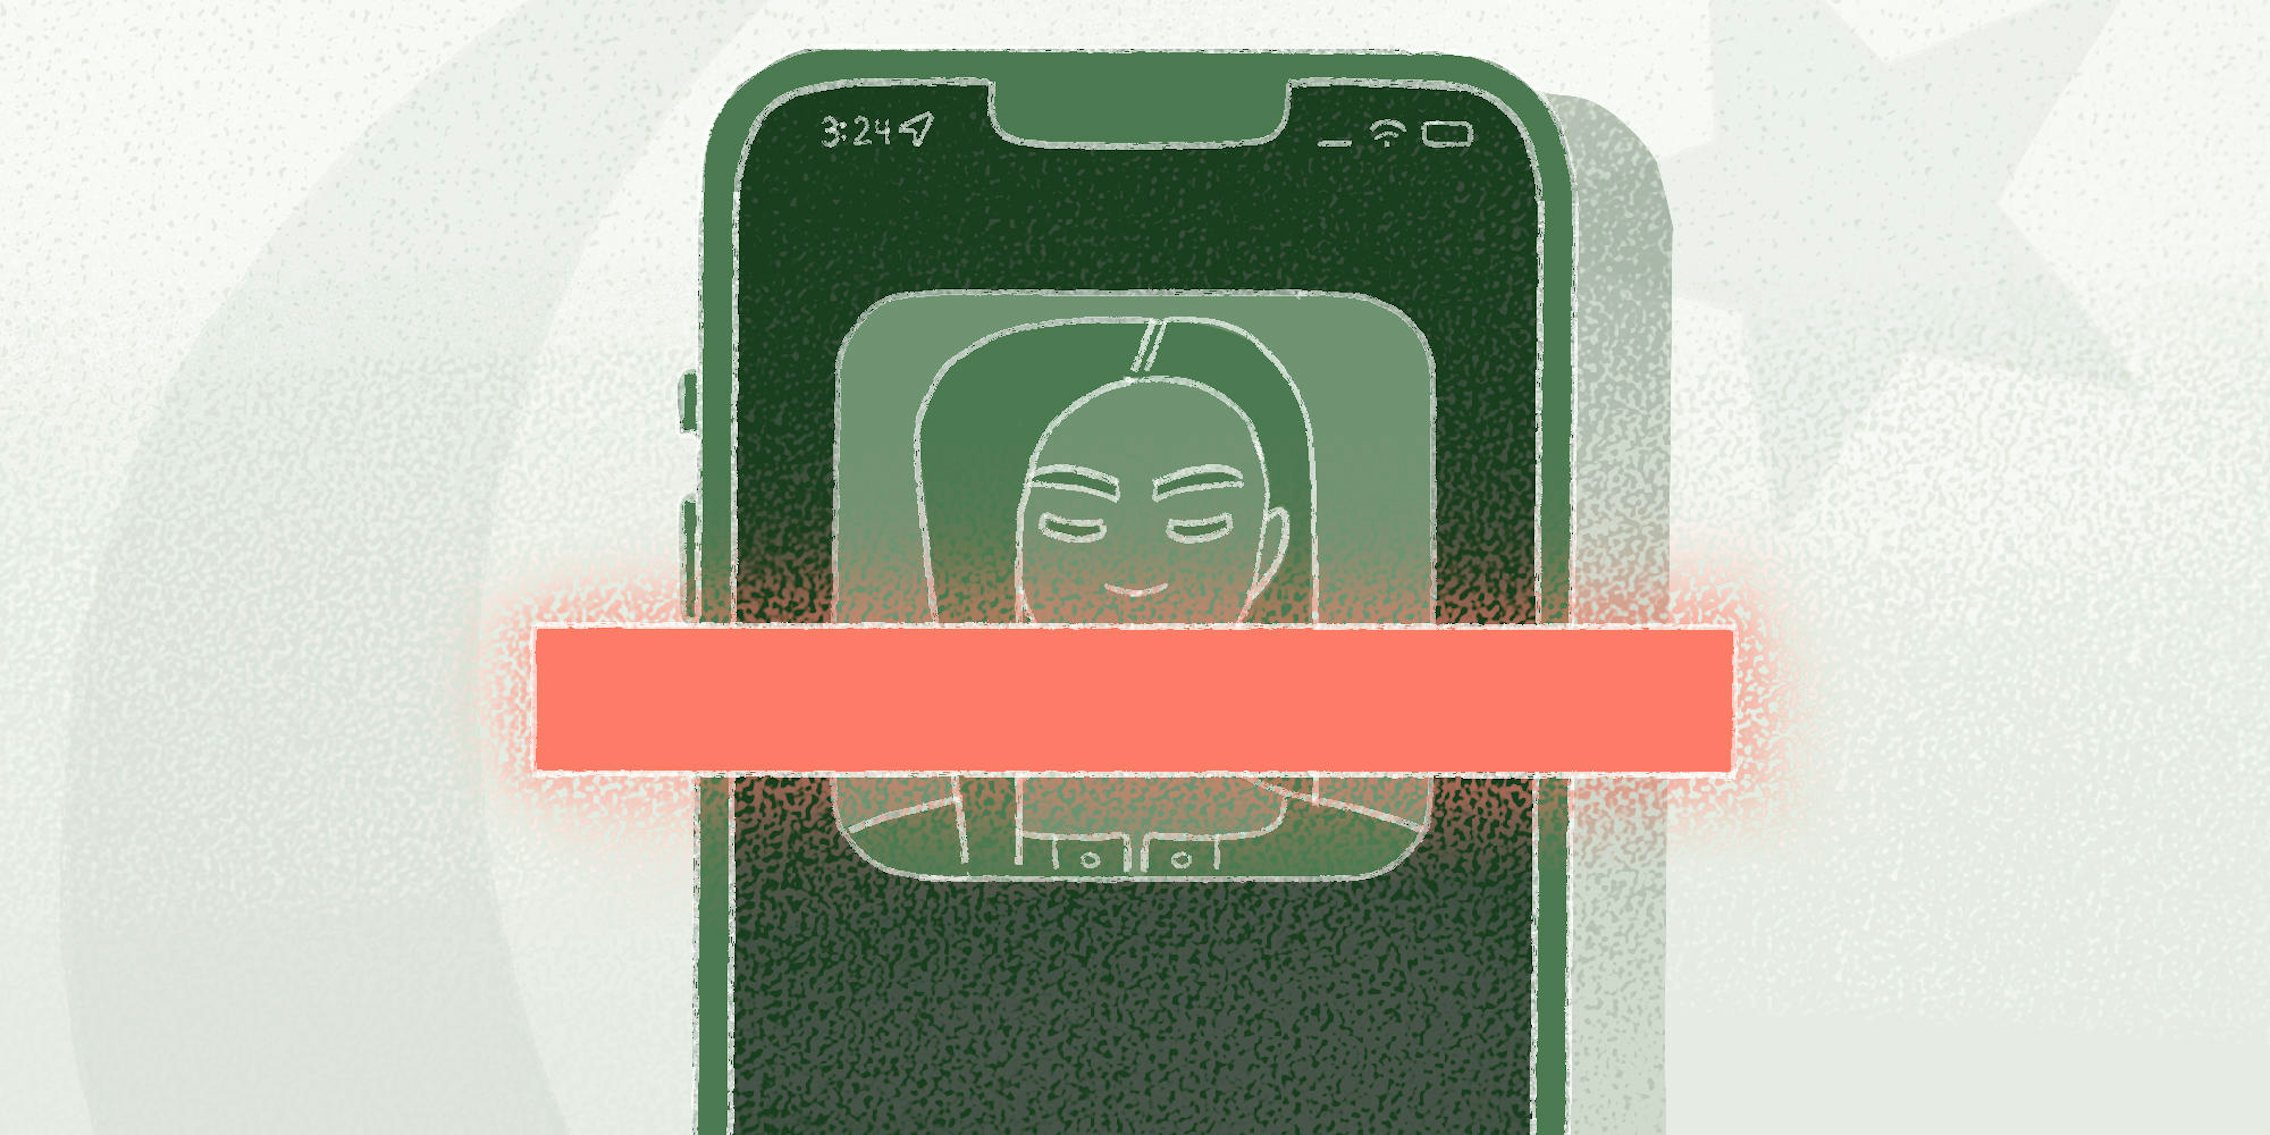 illustration of a woman avatar on a smarphone screen with a censor bar censoring her mouth